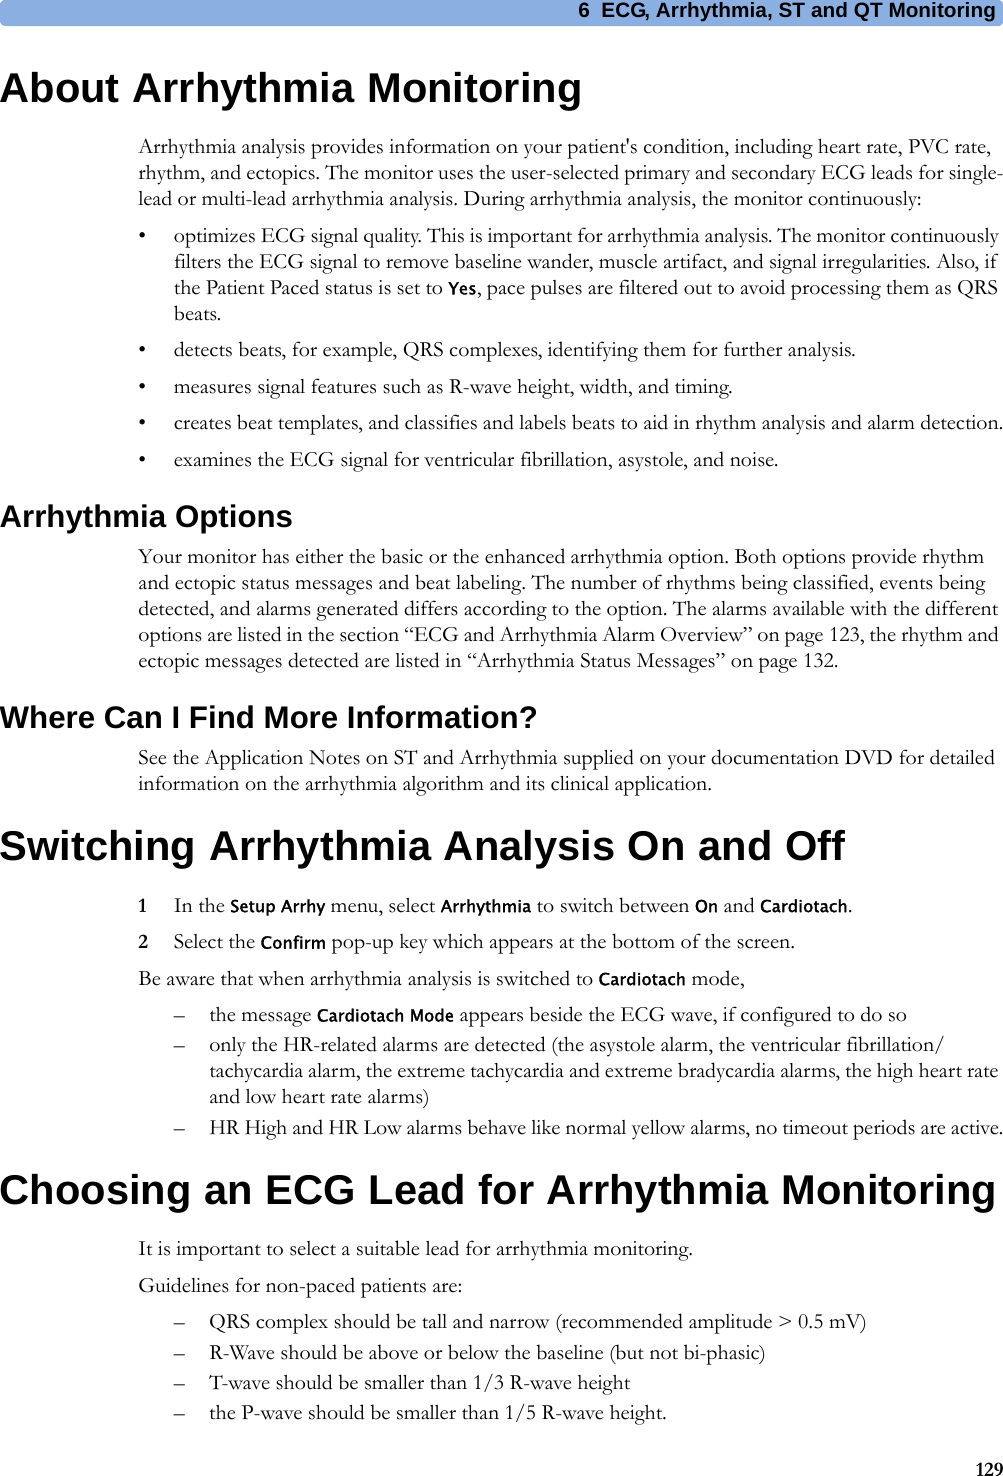 6 ECG, Arrhythmia, ST and QT Monitoring129About Arrhythmia MonitoringArrhythmia analysis provides information on your patient&apos;s condition, including heart rate, PVC rate, rhythm, and ectopics. The monitor uses the user-selected primary and secondary ECG leads for single-lead or multi-lead arrhythmia analysis. During arrhythmia analysis, the monitor continuously:• optimizes ECG signal quality. This is important for arrhythmia analysis. The monitor continuously filters the ECG signal to remove baseline wander, muscle artifact, and signal irregularities. Also, if the Patient Paced status is set to Yes, pace pulses are filtered out to avoid processing them as QRS beats.• detects beats, for example, QRS complexes, identifying them for further analysis.• measures signal features such as R-wave height, width, and timing.• creates beat templates, and classifies and labels beats to aid in rhythm analysis and alarm detection.• examines the ECG signal for ventricular fibrillation, asystole, and noise.Arrhythmia OptionsYour monitor has either the basic or the enhanced arrhythmia option. Both options provide rhythm and ectopic status messages and beat labeling. The number of rhythms being classified, events being detected, and alarms generated differs according to the option. The alarms available with the different options are listed in the section “ECG and Arrhythmia Alarm Overview” on page 123, the rhythm and ectopic messages detected are listed in “Arrhythmia Status Messages” on page 132.Where Can I Find More Information?See the Application Notes on ST and Arrhythmia supplied on your documentation DVD for detailed information on the arrhythmia algorithm and its clinical application.Switching Arrhythmia Analysis On and Off1In the Setup Arrhy menu, select Arrhythmia to switch between On and Cardiotach.2Select the Confirm pop-up key which appears at the bottom of the screen.Be aware that when arrhythmia analysis is switched to Cardiotach mode,– the message Cardiotach Mode appears beside the ECG wave, if configured to do so– only the HR-related alarms are detected (the asystole alarm, the ventricular fibrillation/tachycardia alarm, the extreme tachycardia and extreme bradycardia alarms, the high heart rate and low heart rate alarms)– HR High and HR Low alarms behave like normal yellow alarms, no timeout periods are active.Choosing an ECG Lead for Arrhythmia MonitoringIt is important to select a suitable lead for arrhythmia monitoring.Guidelines for non-paced patients are:– QRS complex should be tall and narrow (recommended amplitude &gt; 0.5 mV)– R-Wave should be above or below the baseline (but not bi-phasic)– T-wave should be smaller than 1/3 R-wave height– the P-wave should be smaller than 1/5 R-wave height.